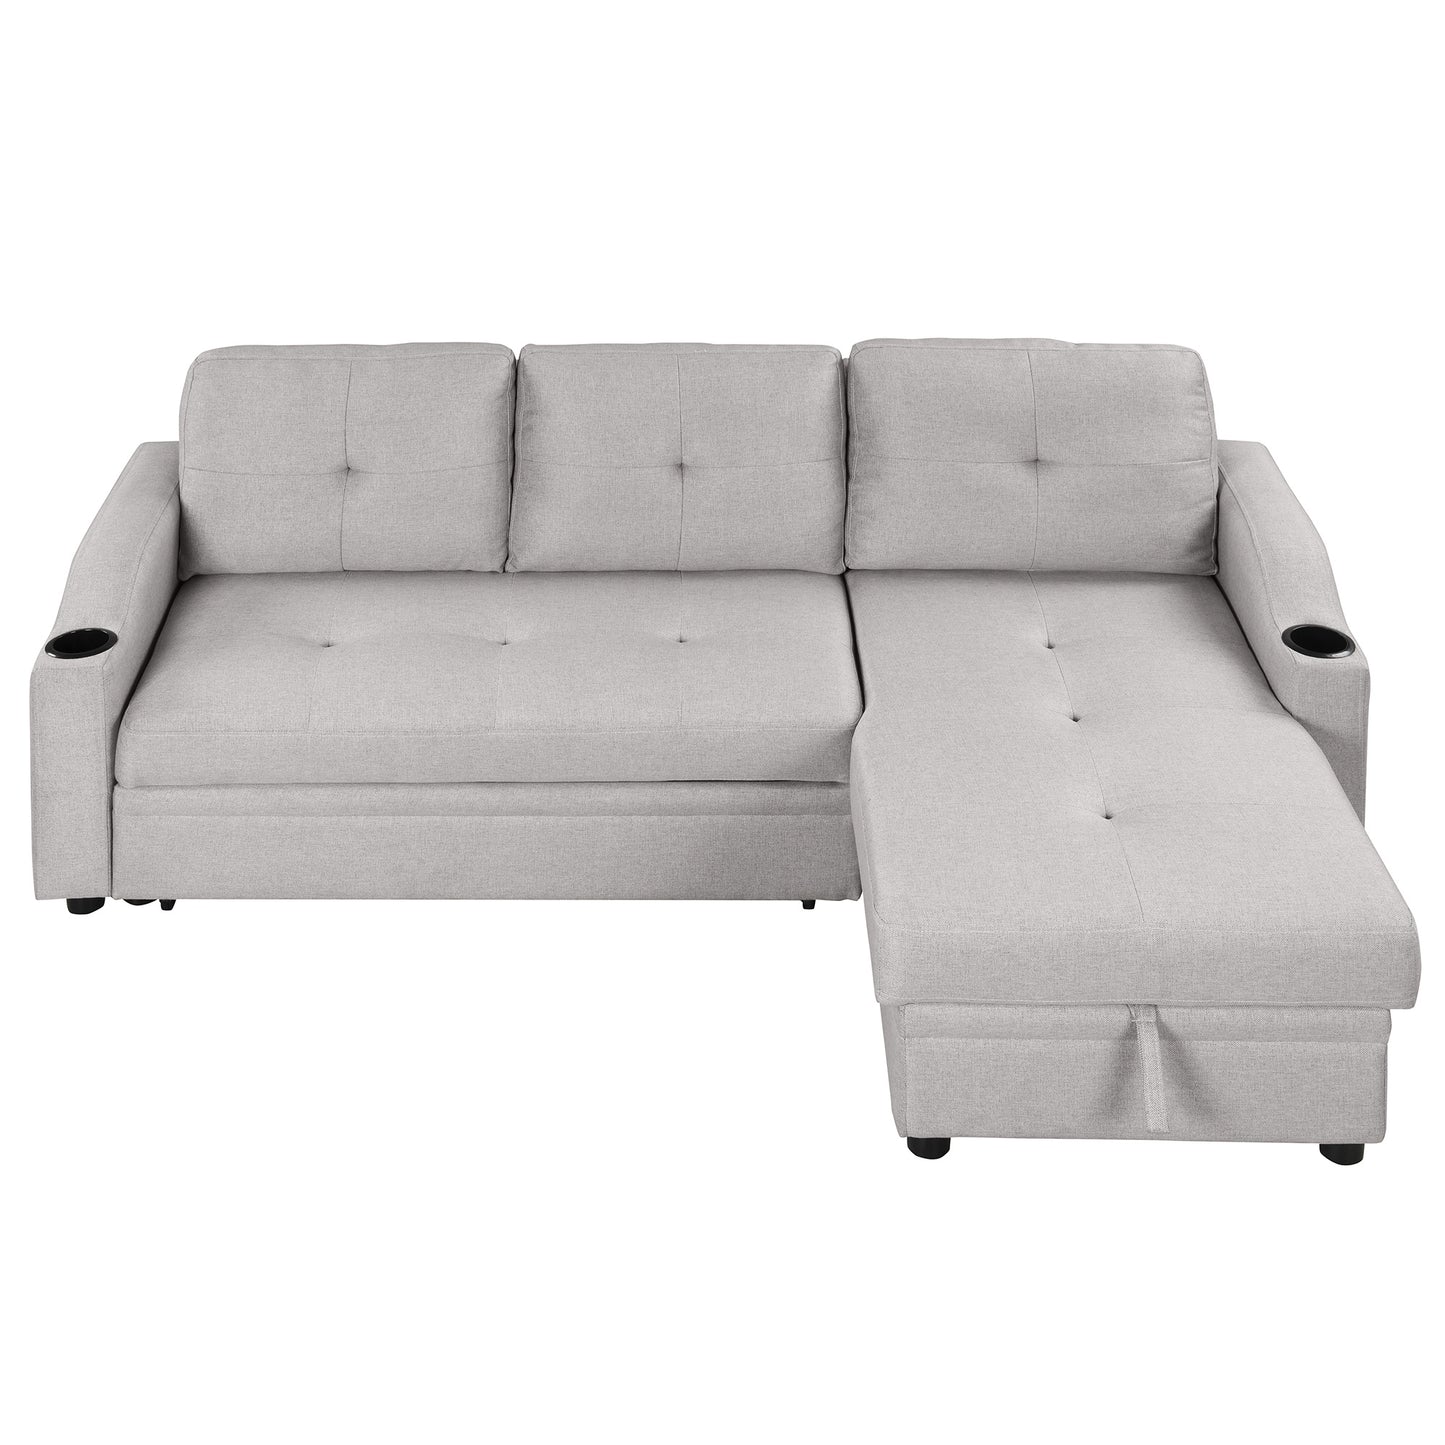 Modern Padded Sofa Bed, Linen Fabric 3-Seater Couch with Storage Chaise